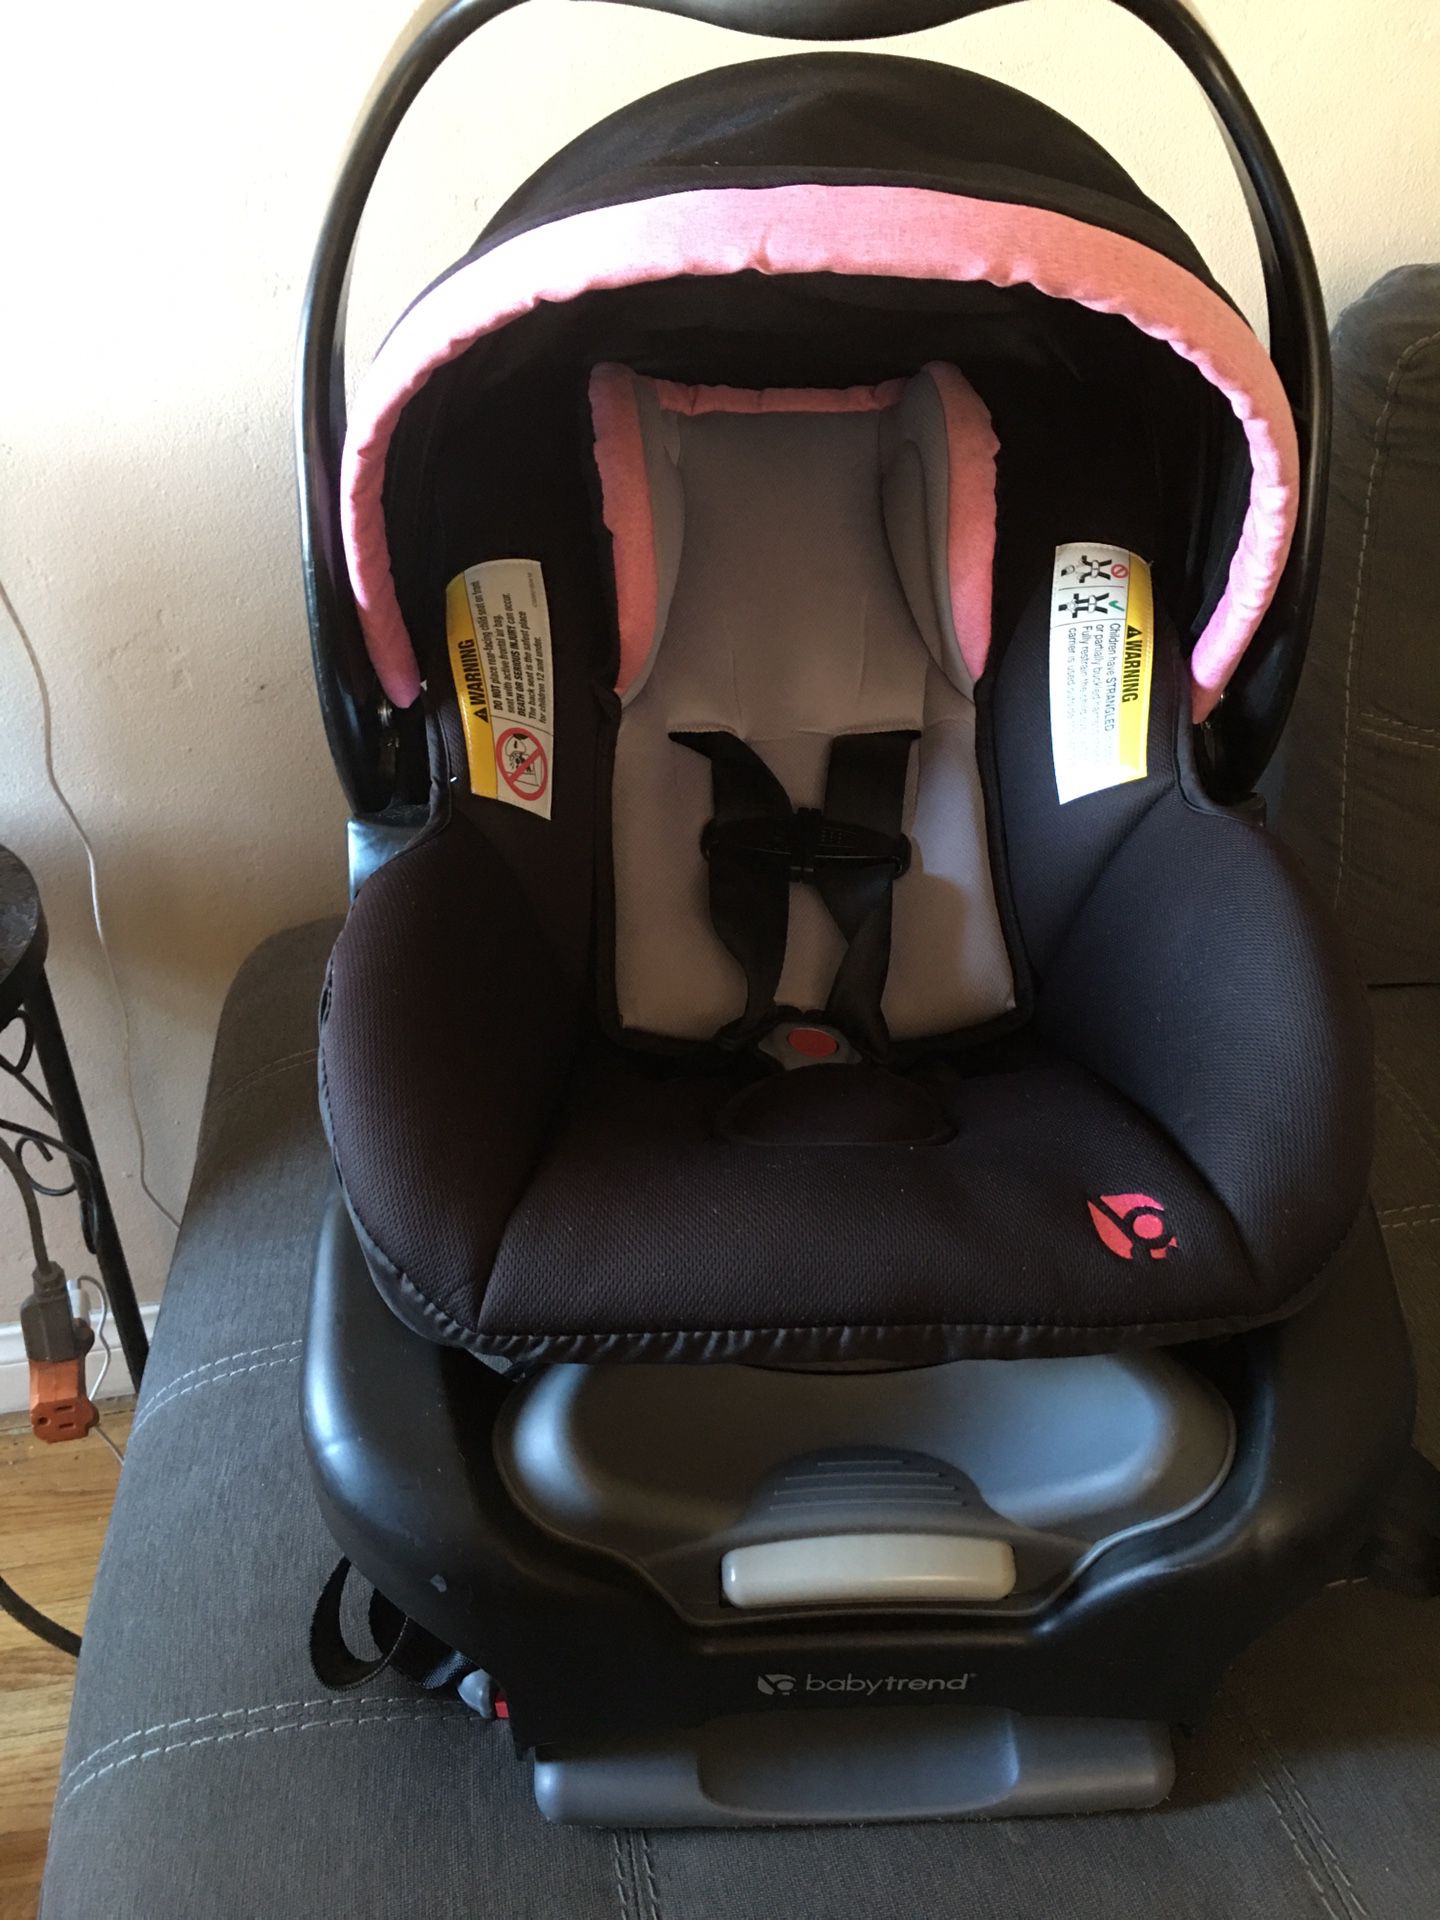 Baby Trend Secure Snap Gear 35 Infant Car Seat